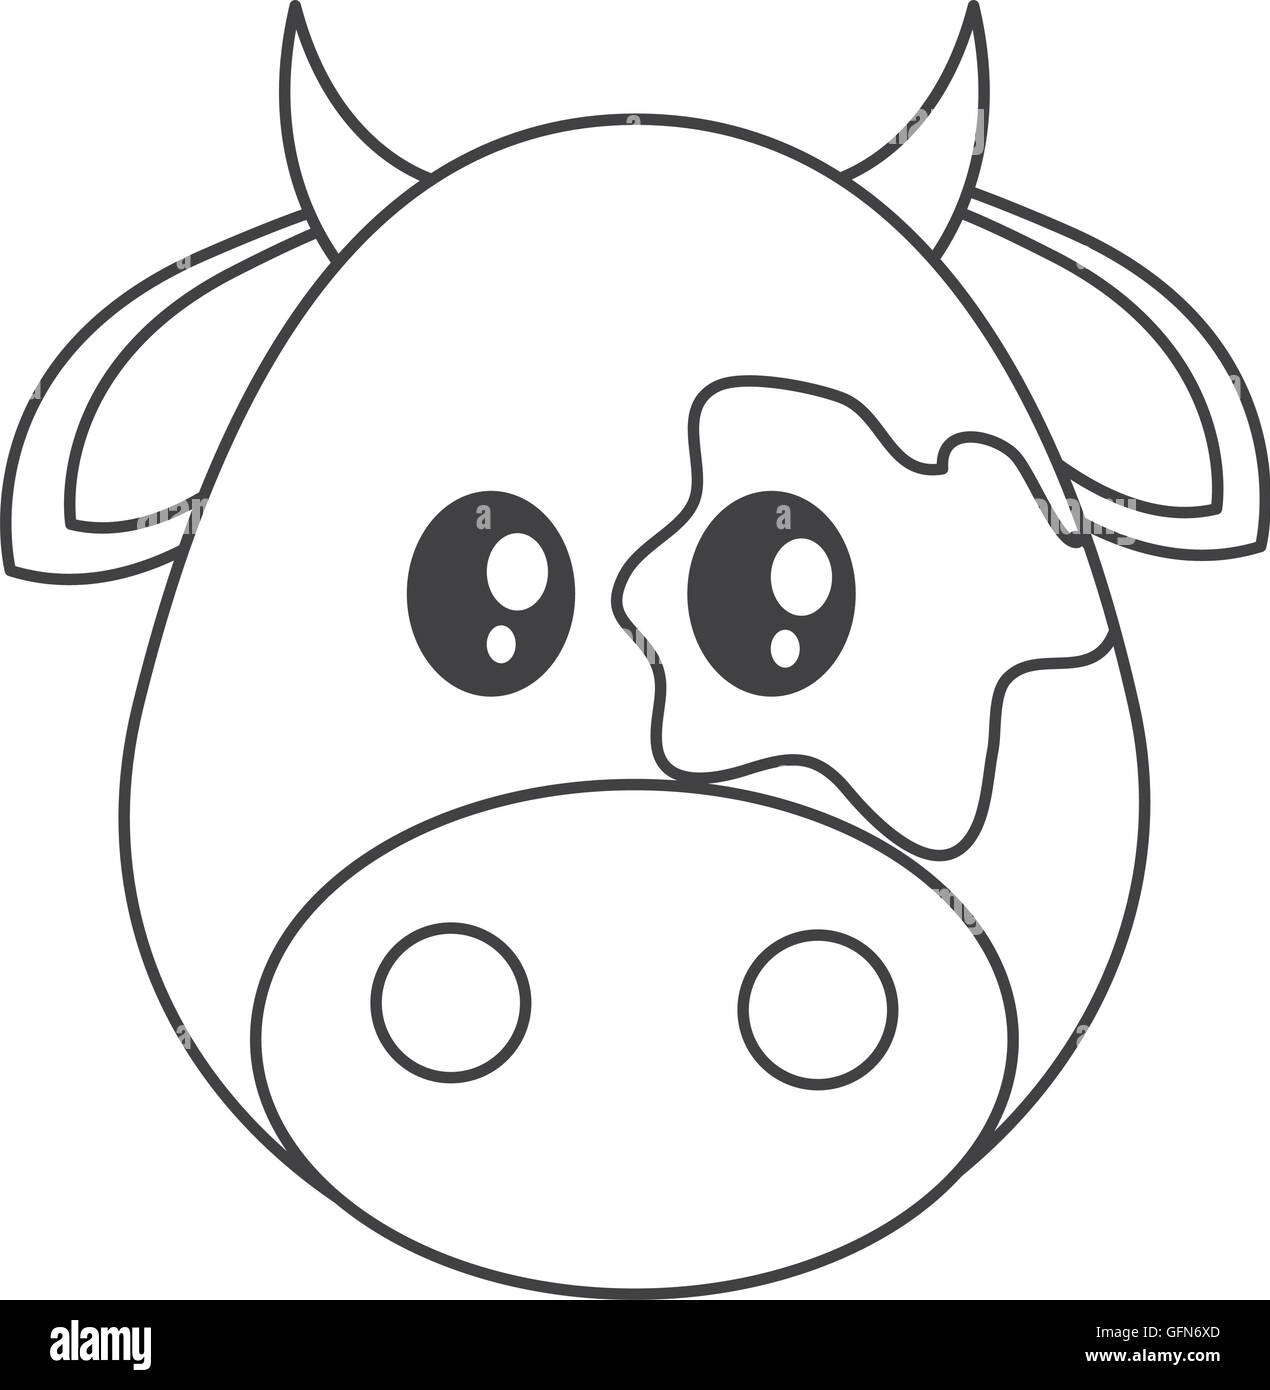 Funny Cow Black and White Stock Photos & Images - Alamy